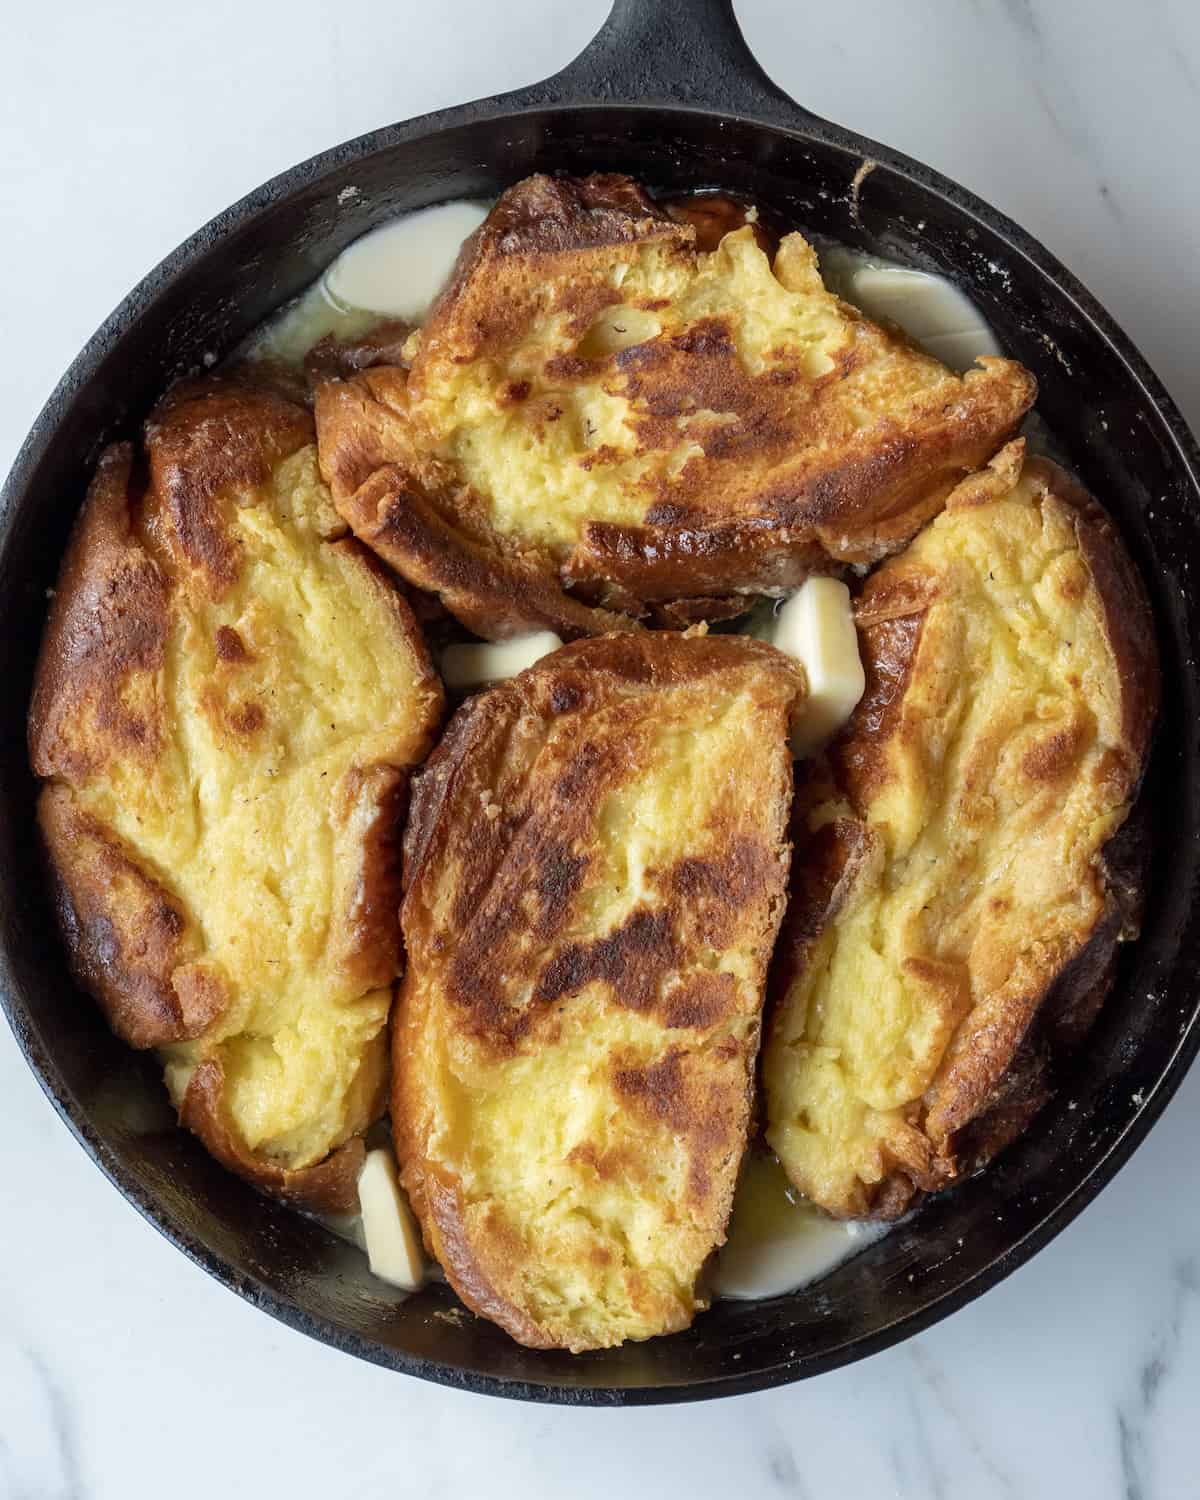 Skillet with bread slices soaked into french toast batter cooked on one side along with butter on the base of the skillet.